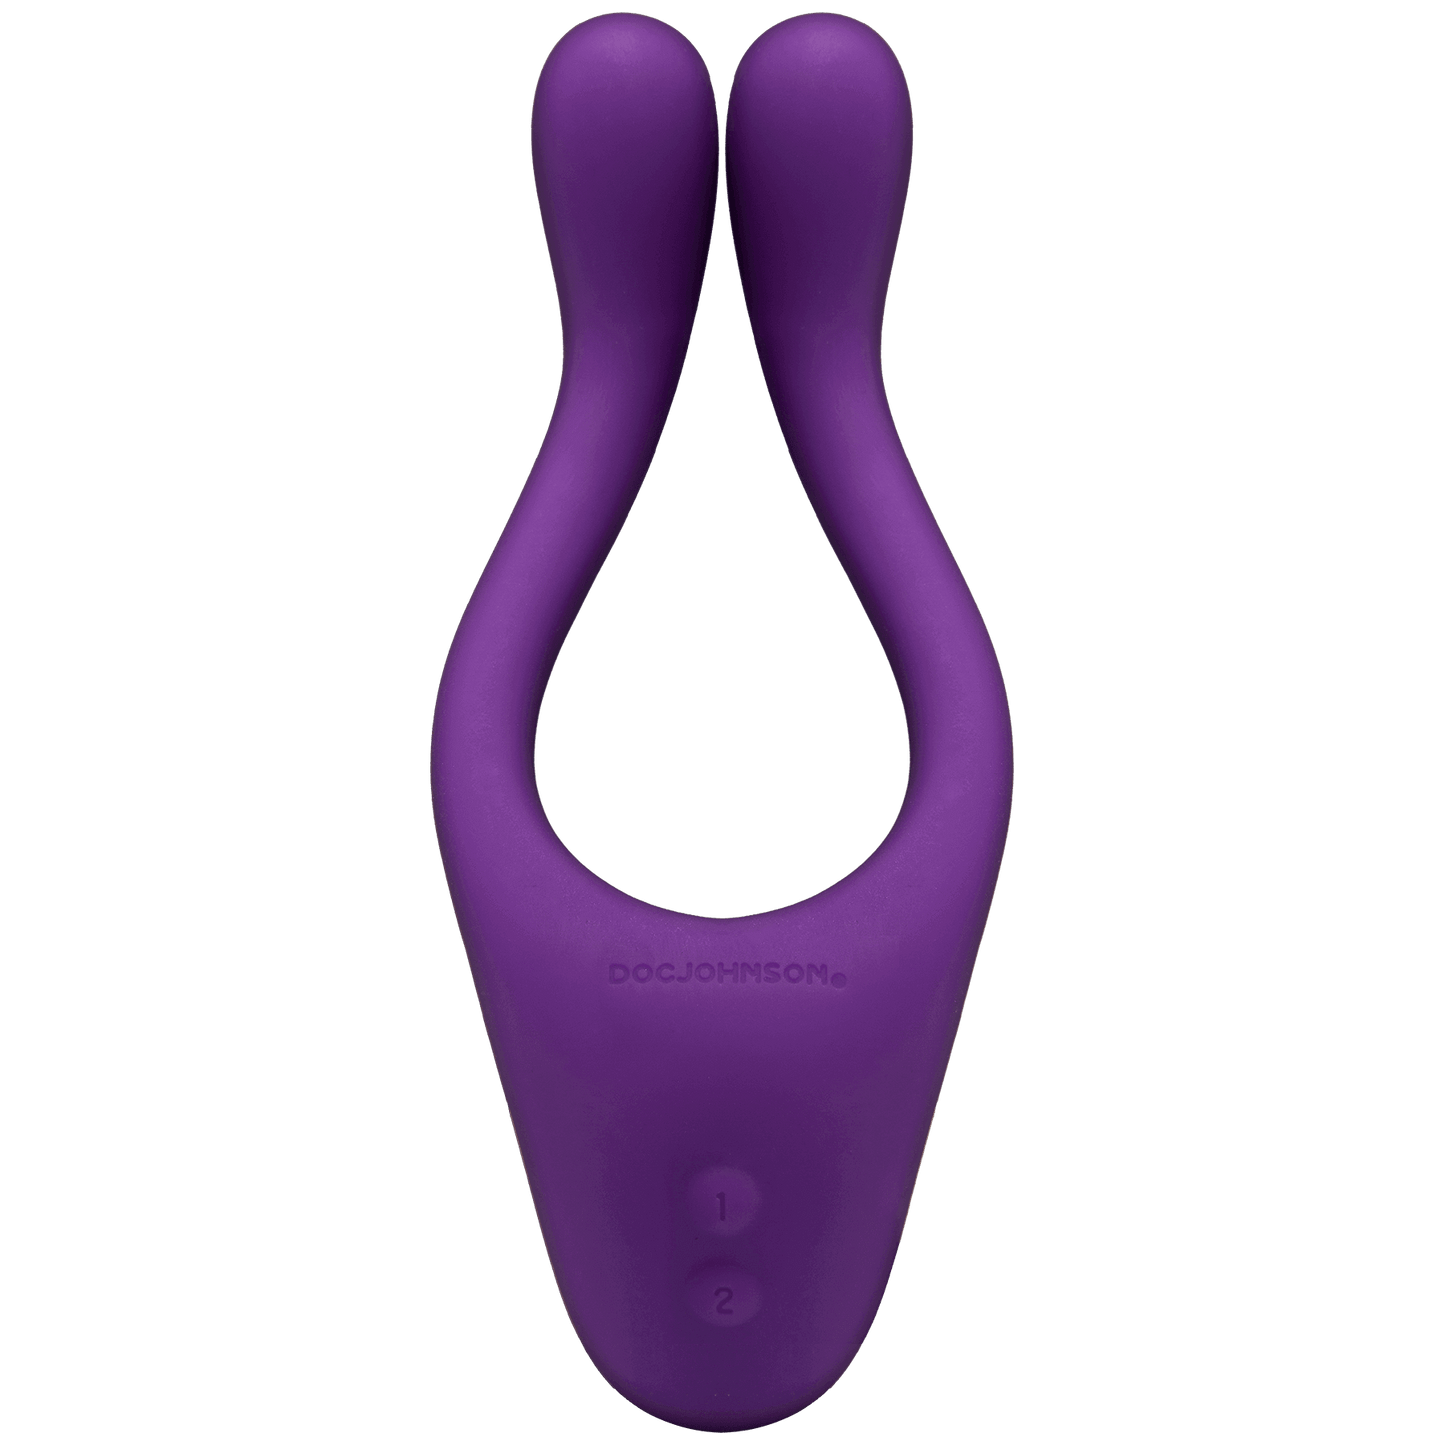 Tryst Multi Erogenous Zone Massager in purple  - Doc Johnson - by The Bigger O - an online sex toy shop. We ship to USA, Canada and the UK.